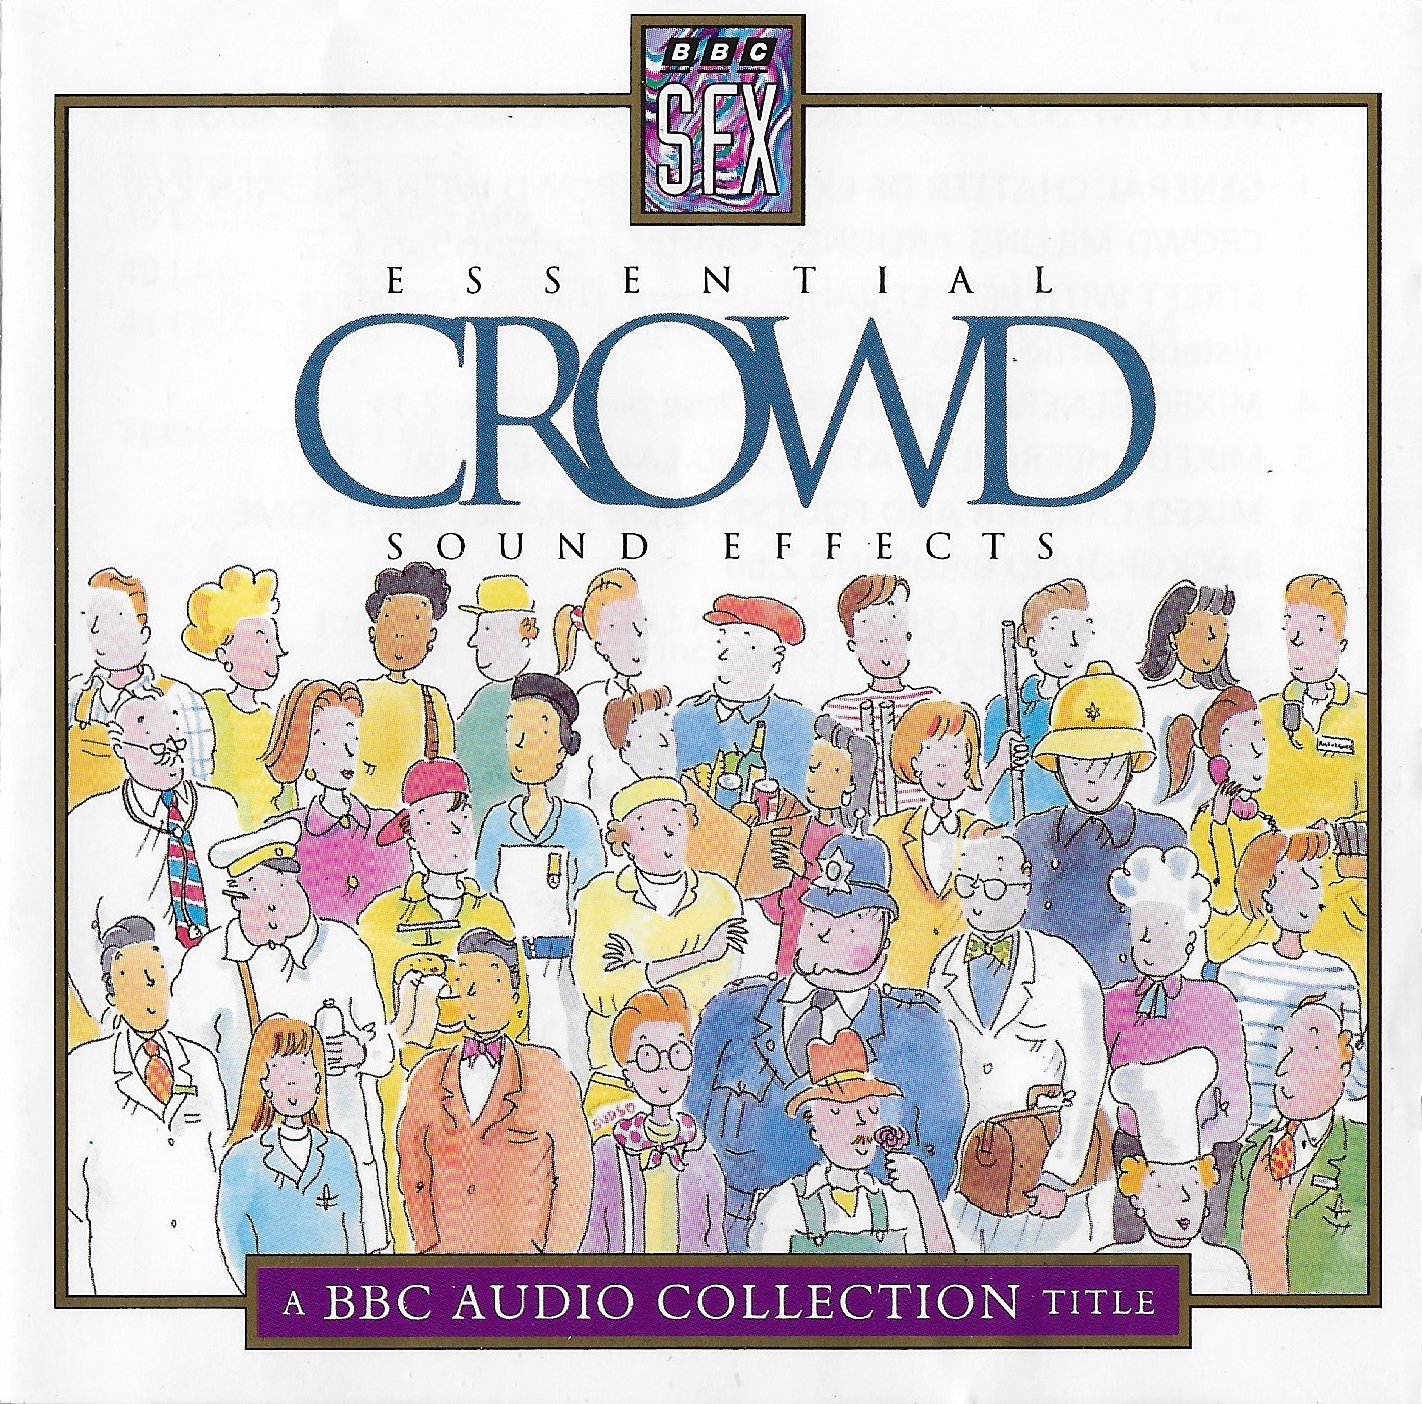 Picture of Essential crowd sound effects by artist Various from the BBC cds - Records and Tapes library